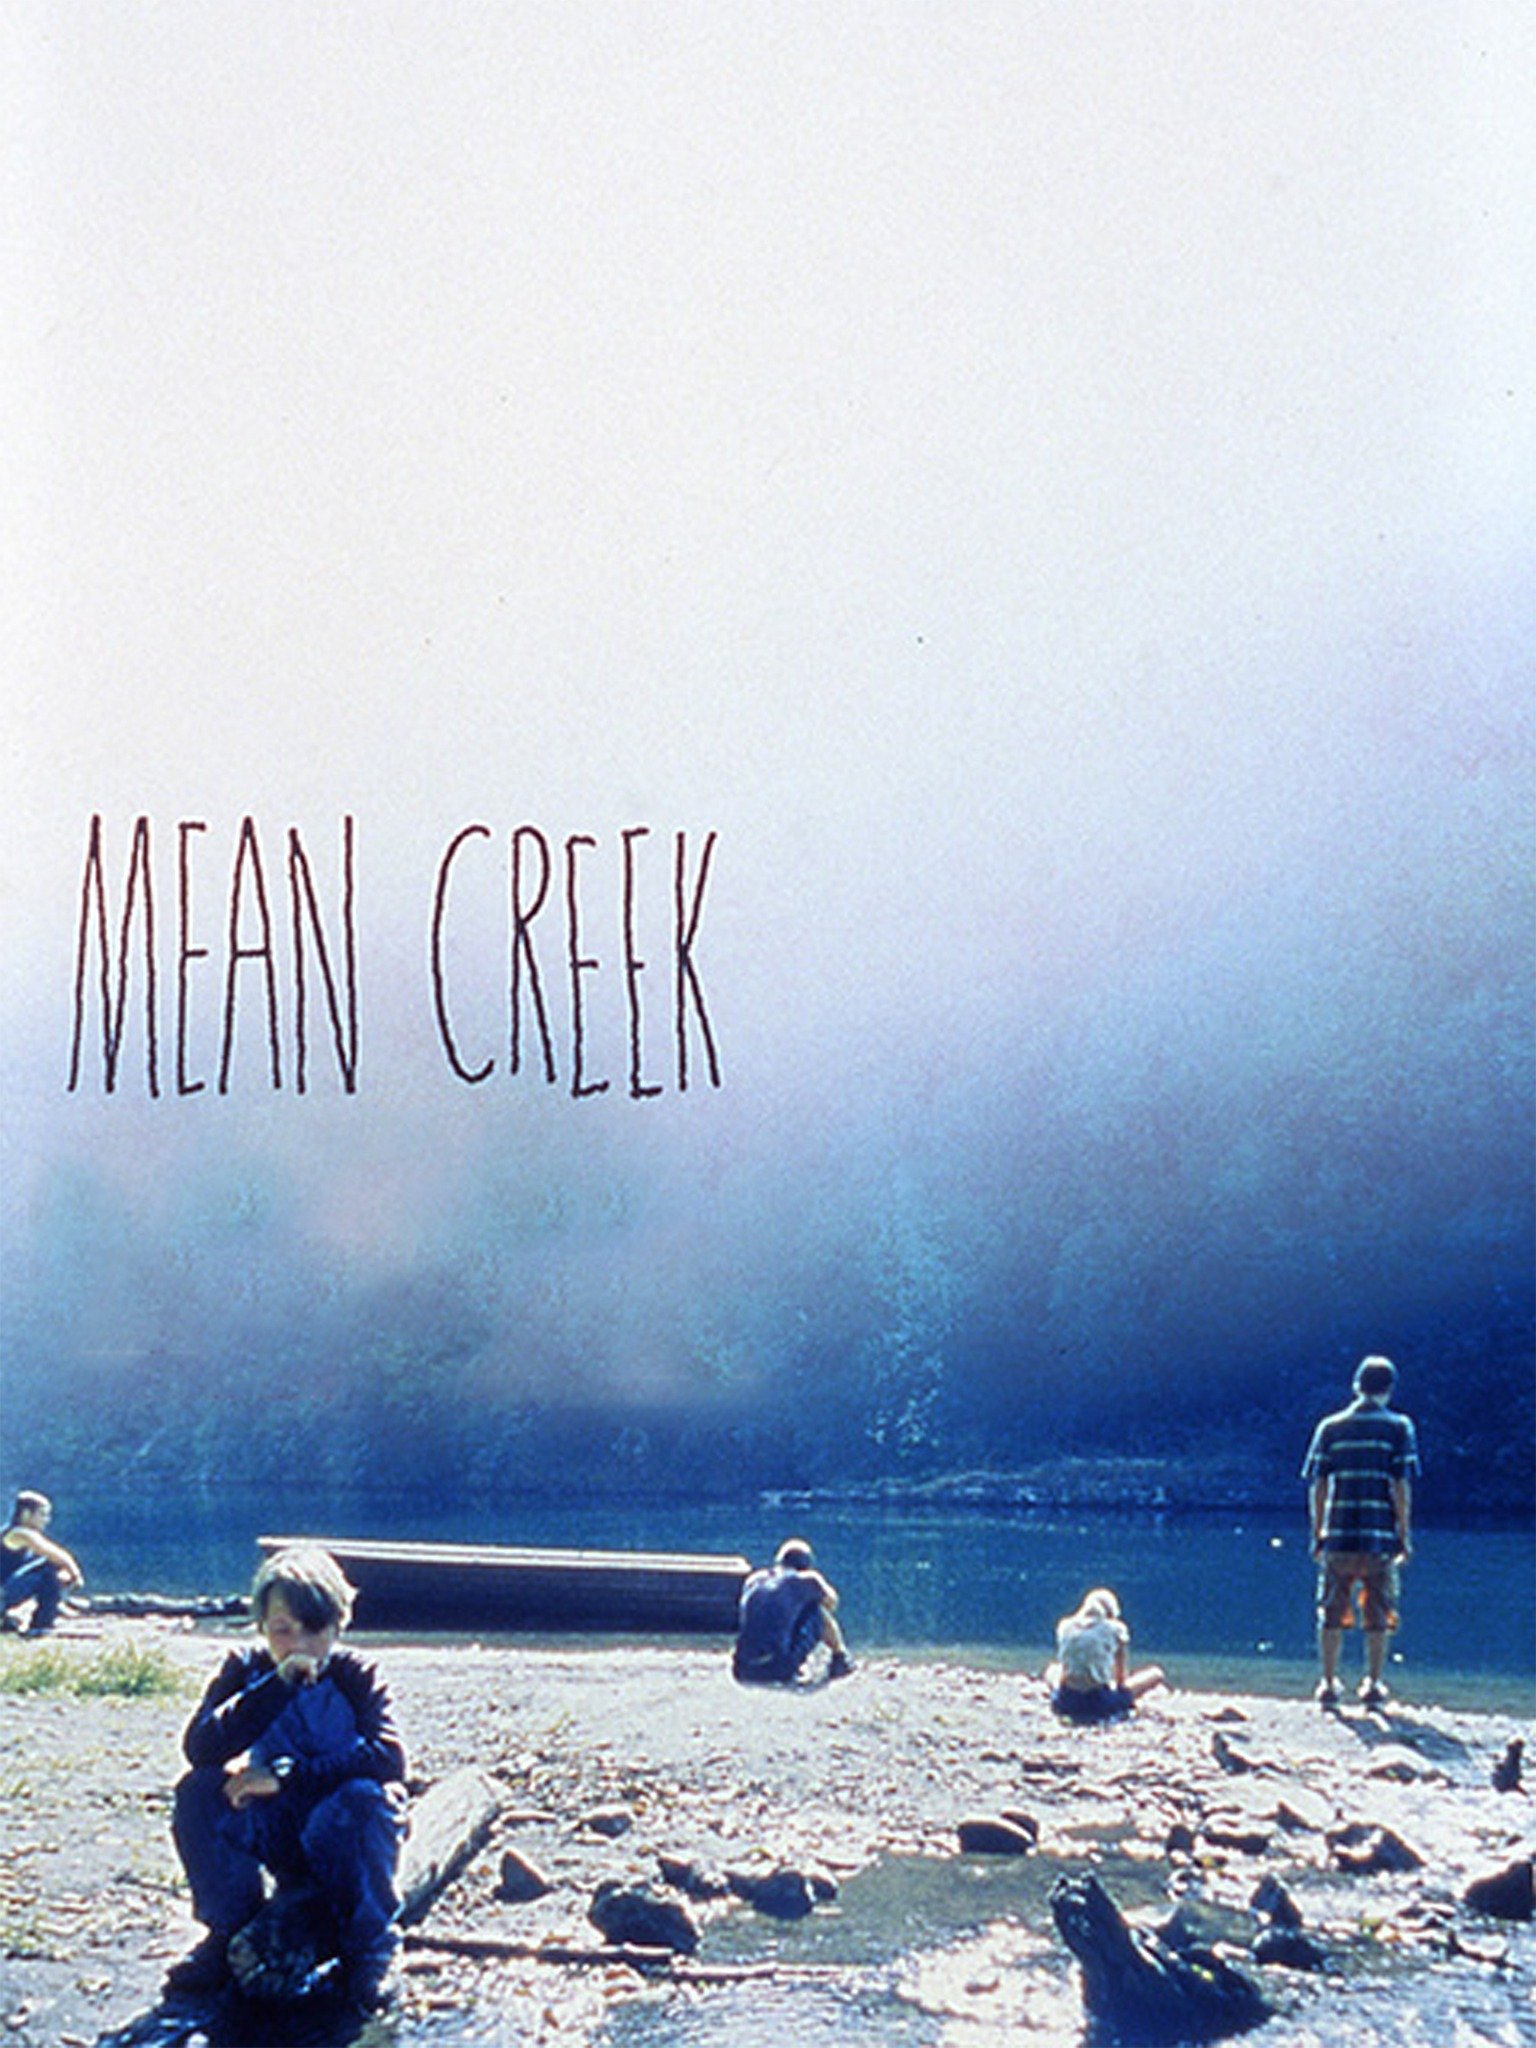 Mean Creek photo image picture